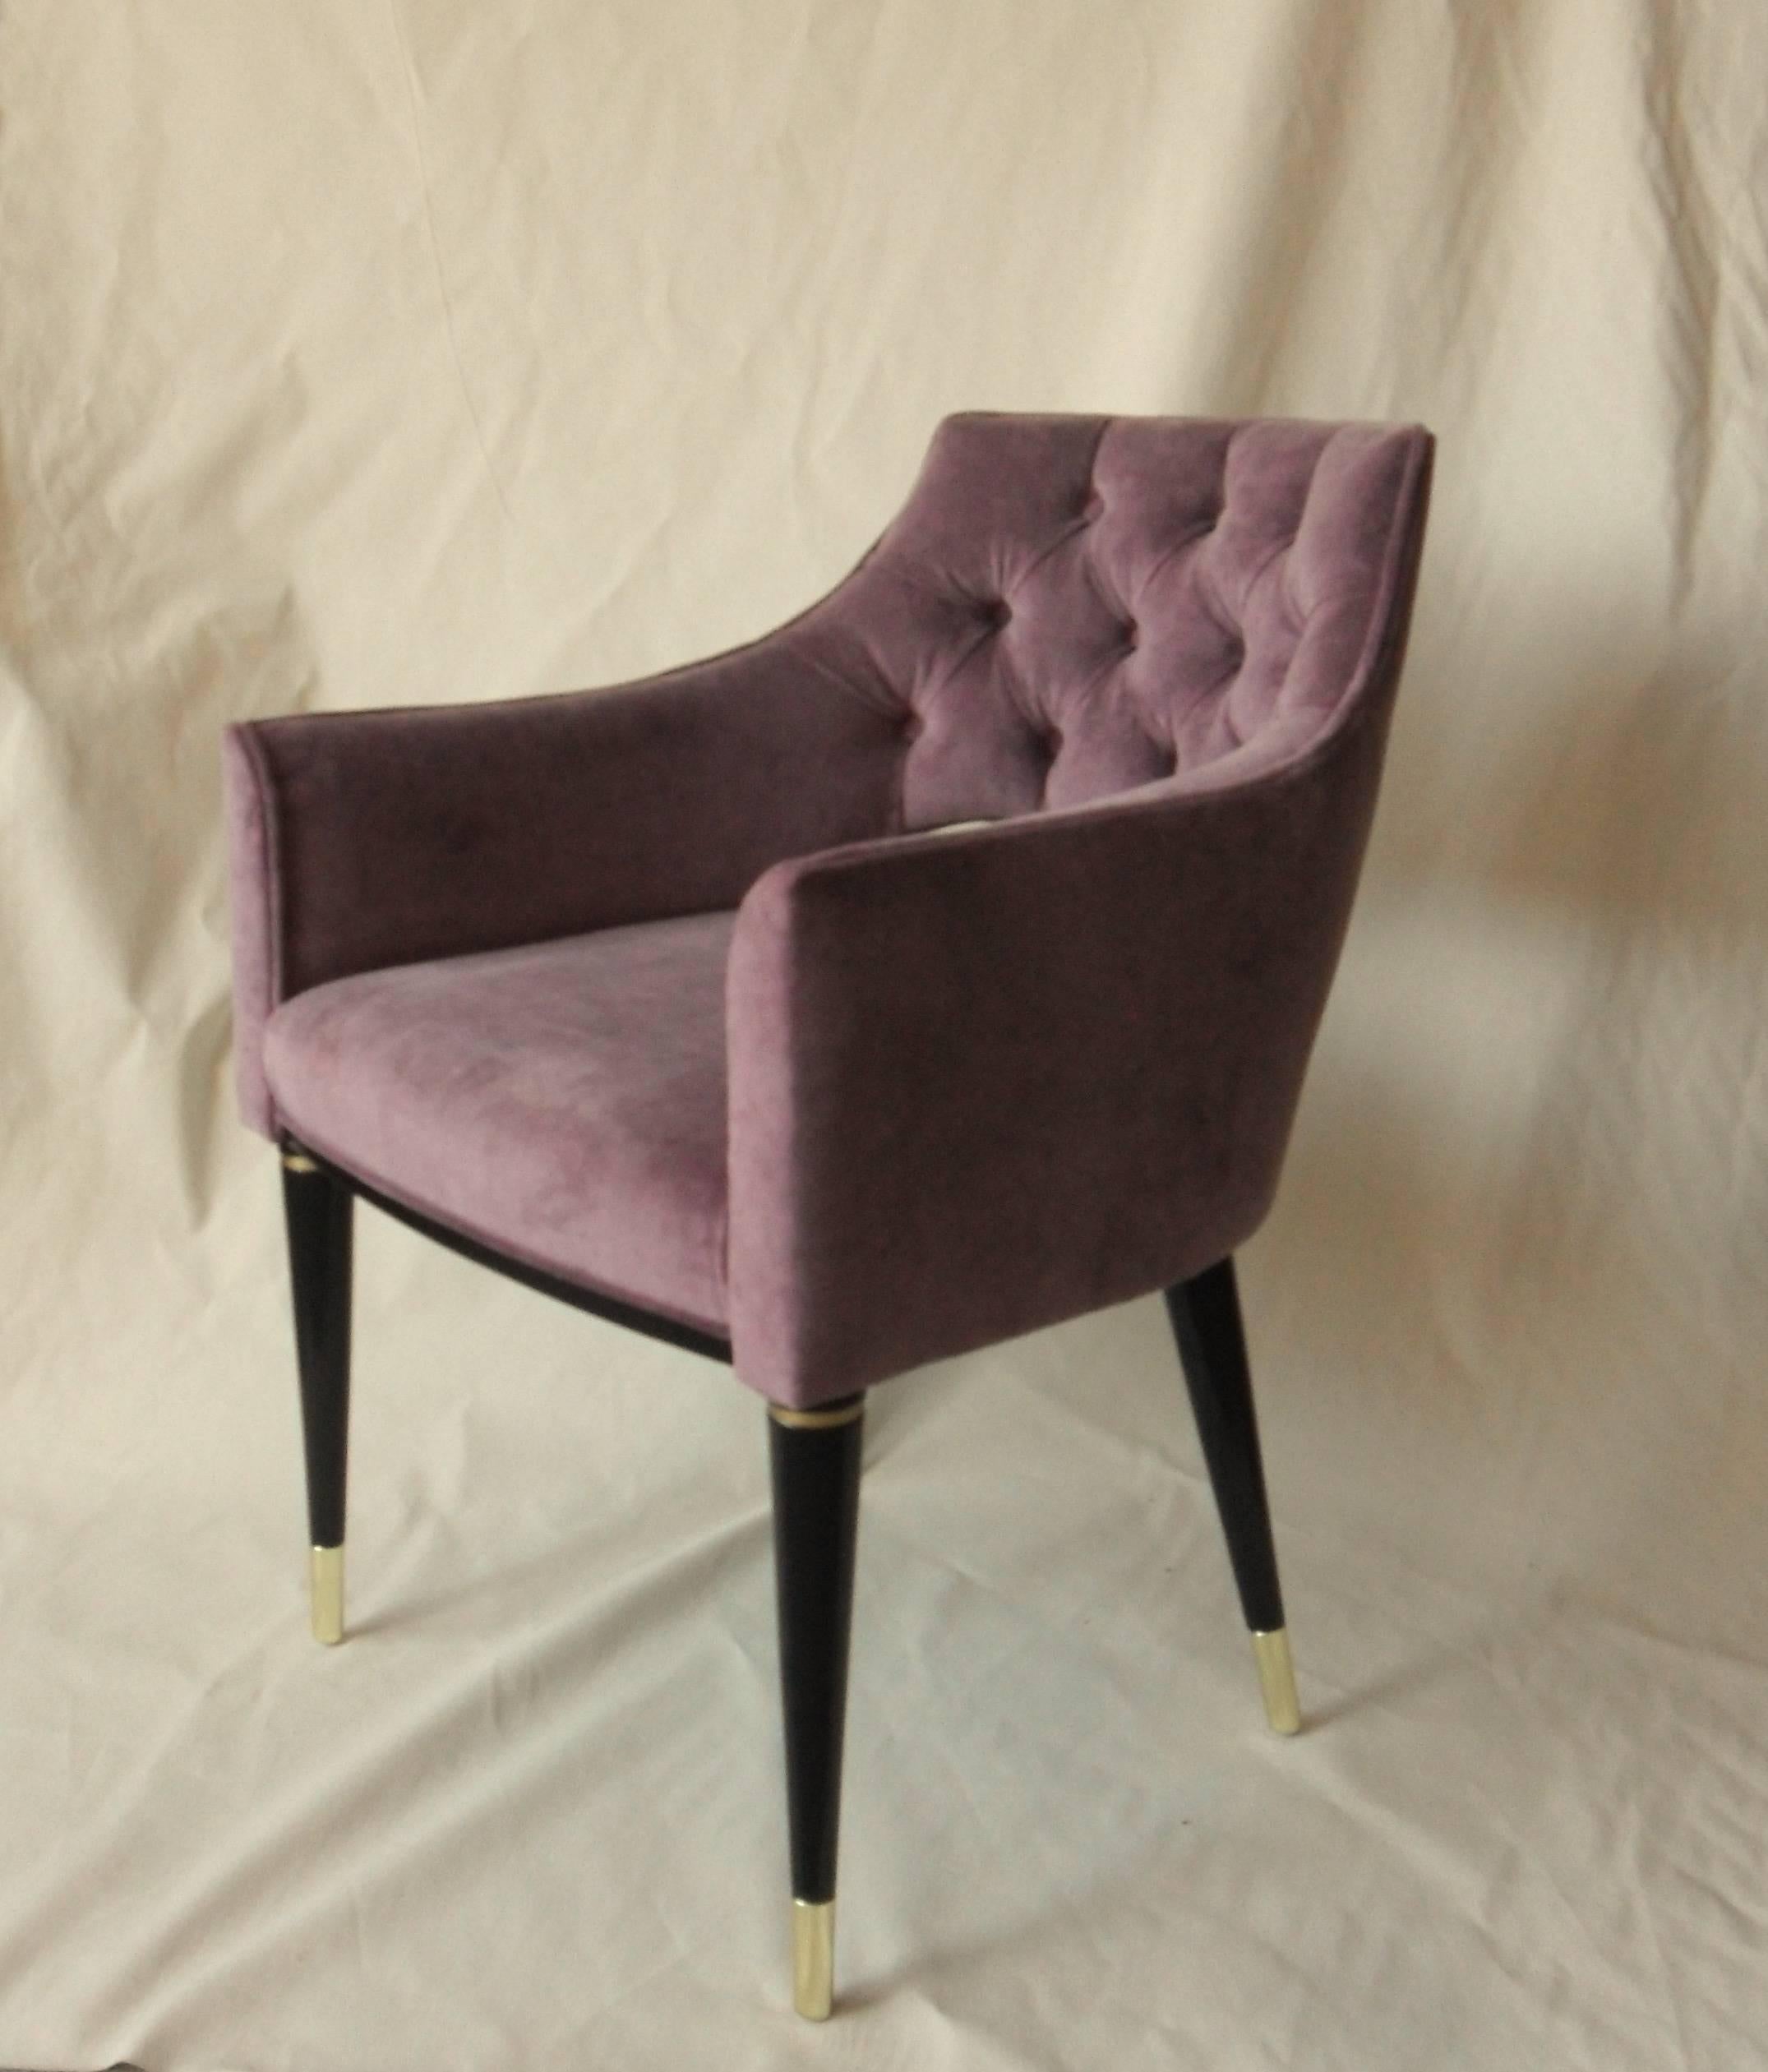 Superb midcentury chair. Set of ten made with beautiful deep English rose velvet. 

Restauration grade finishing and upholstering. Metal ring and fittings.
Extremely comfortable and chic.
Tuscan woven cotton 50% and polyester 50%. Martindale  above